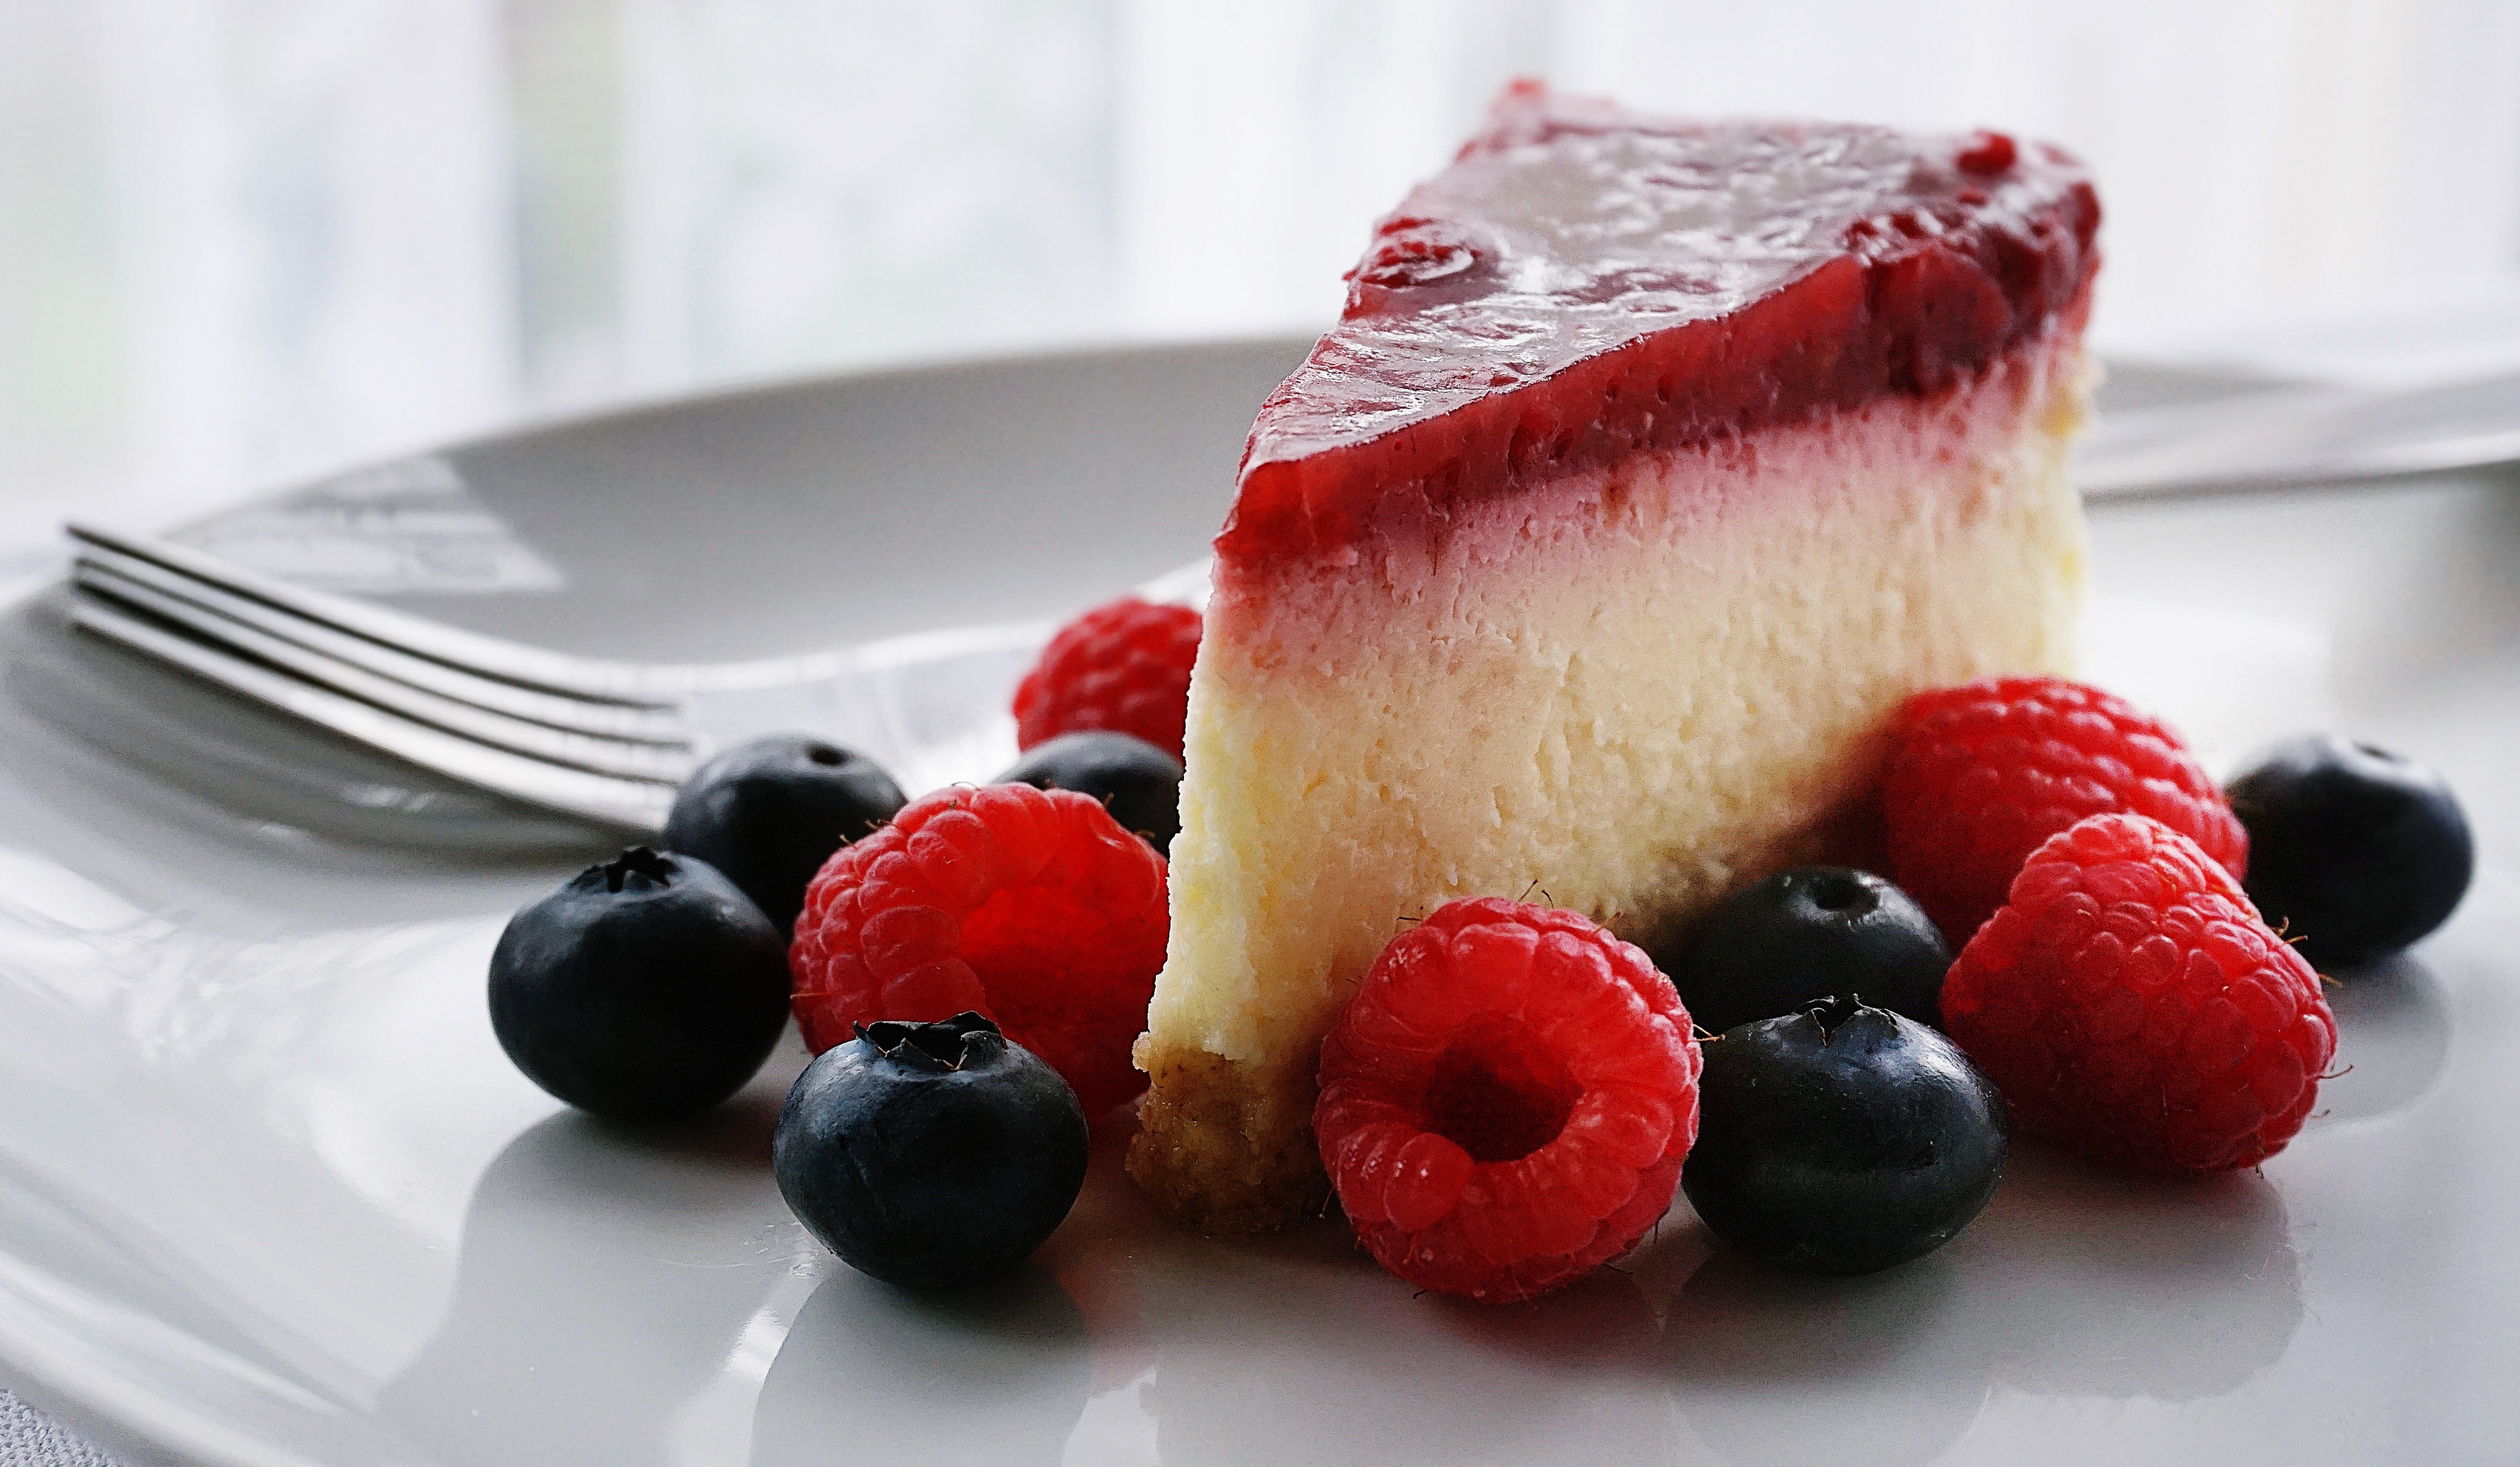 cheesecake slice with strawberries and blueberries in plate